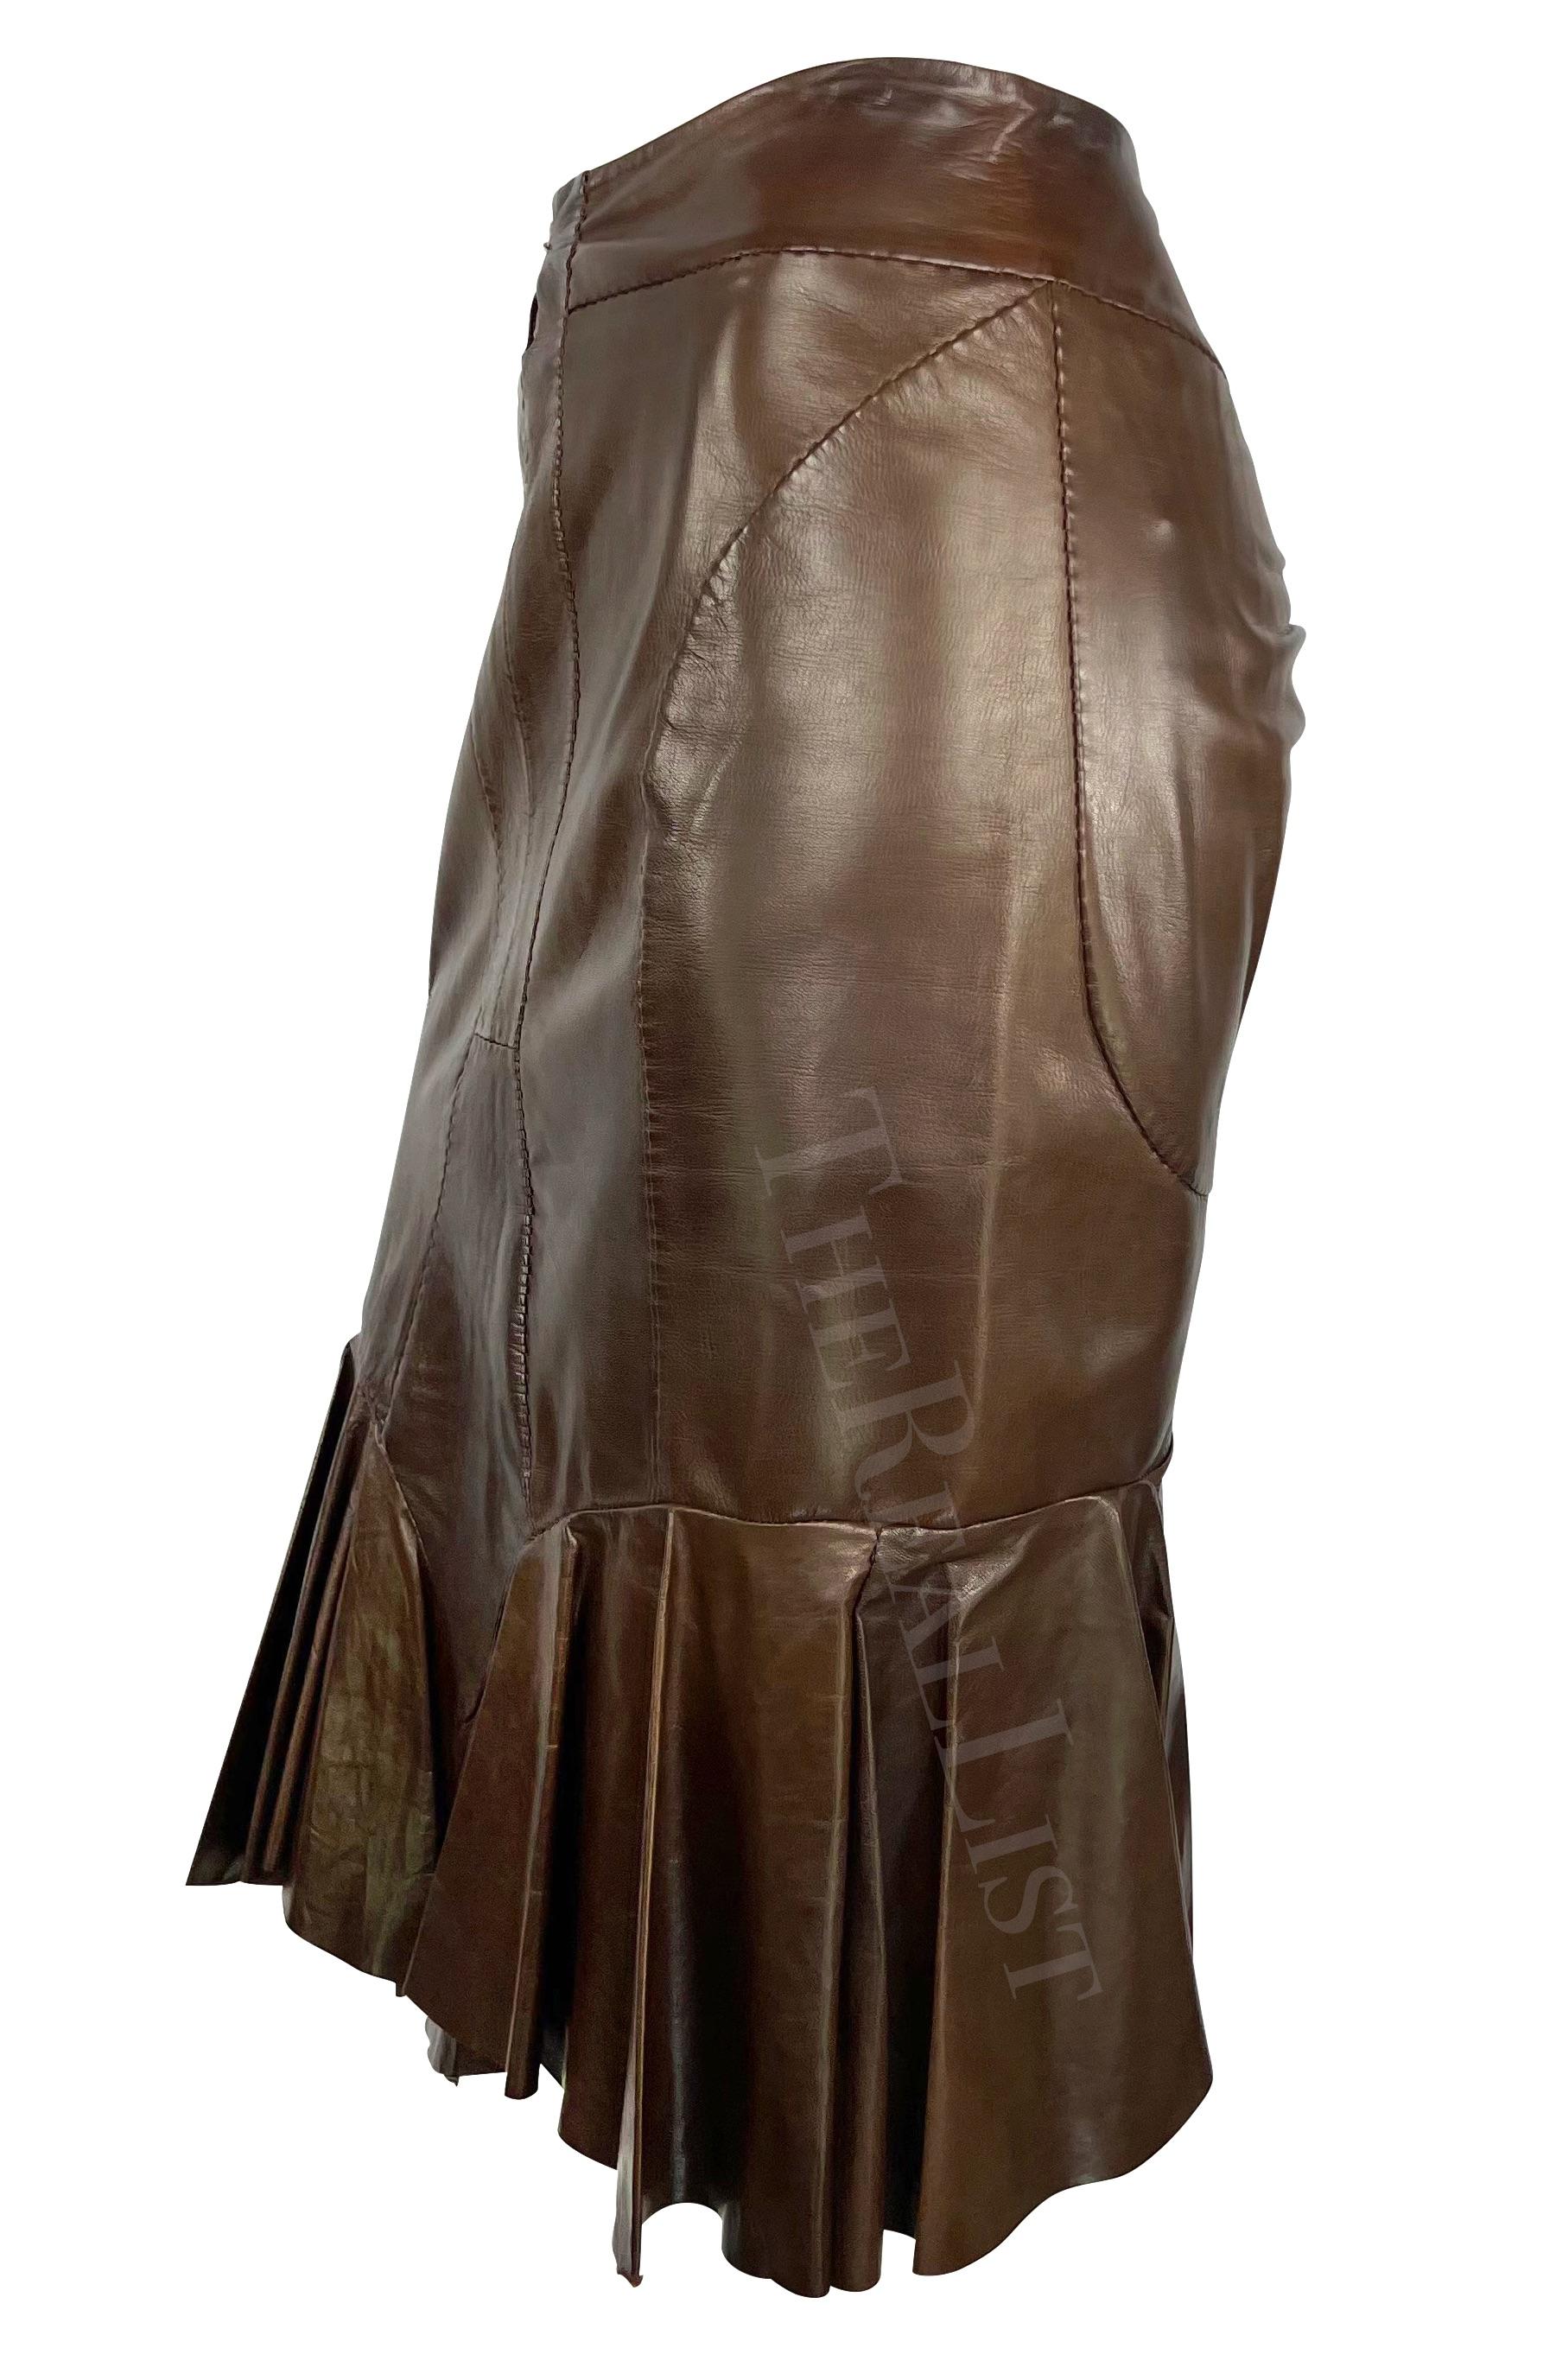 S/S 2003 Yves Saint Laurent by Tom Ford Anatomic Brown Leather Ruffle Skirt For Sale 1